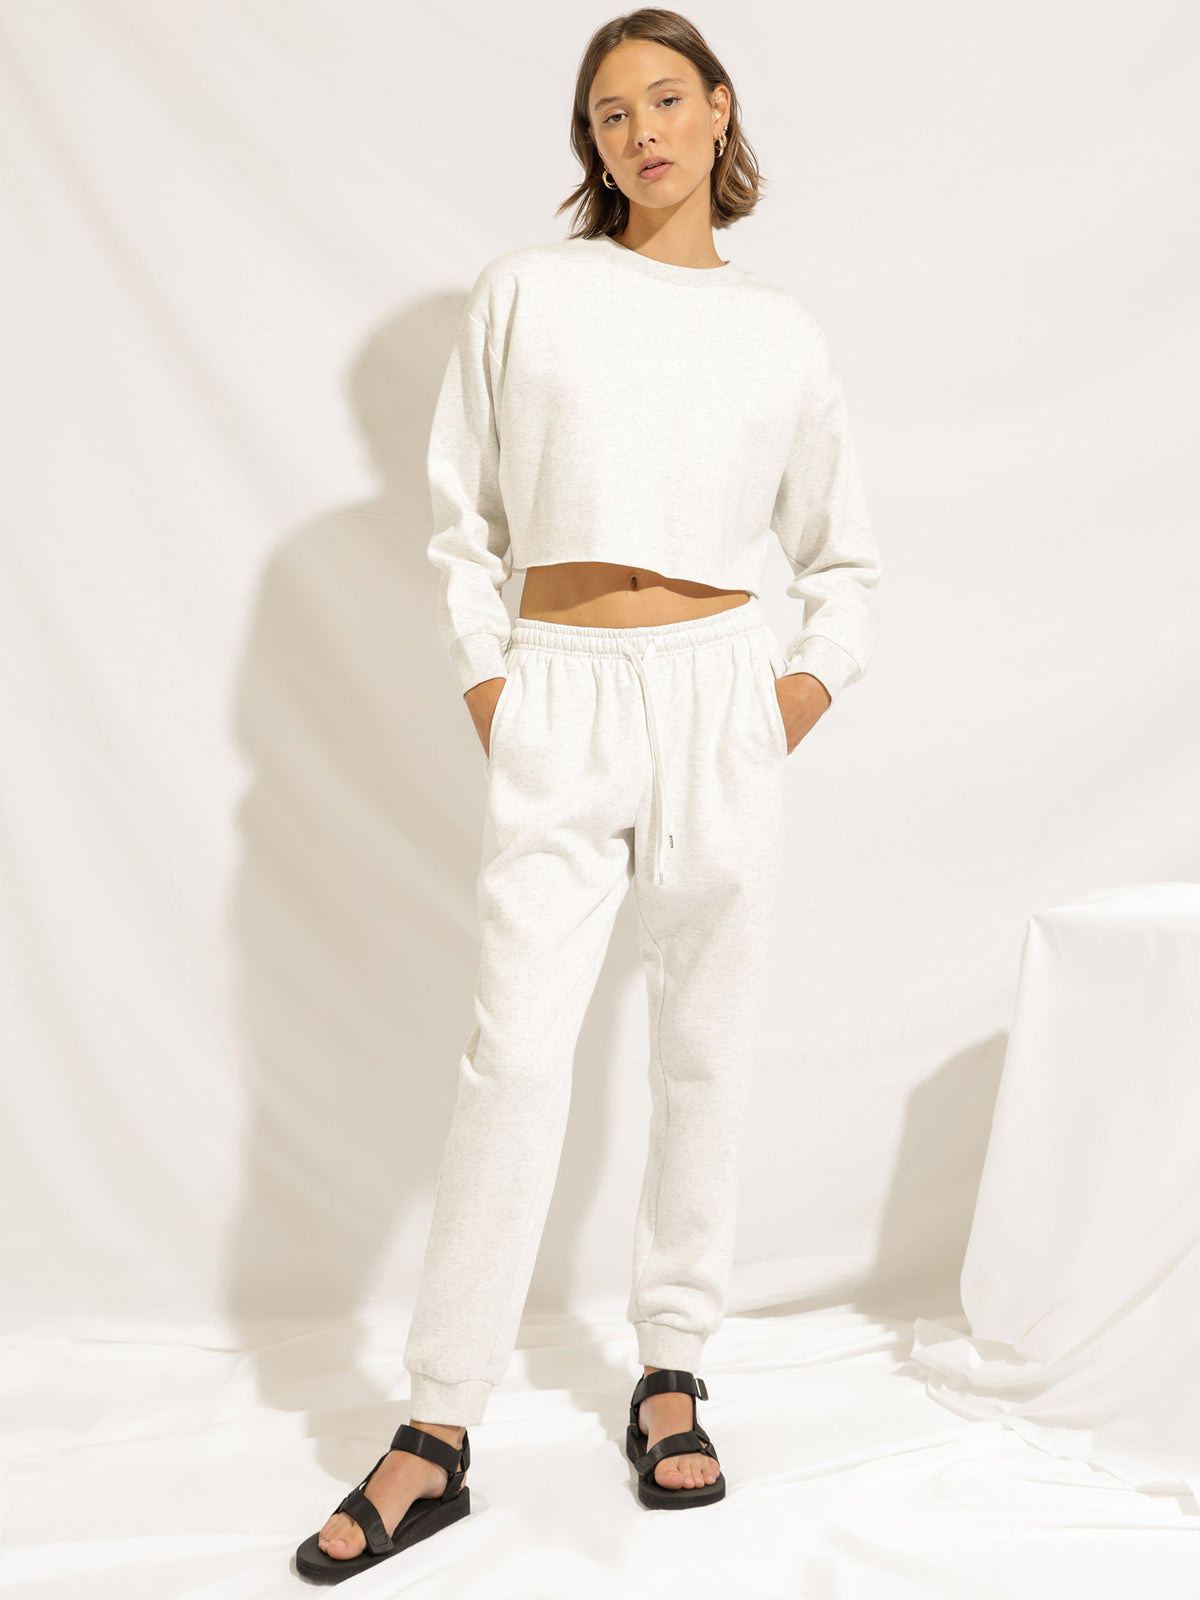 Carter Trackpant in Snow Marle